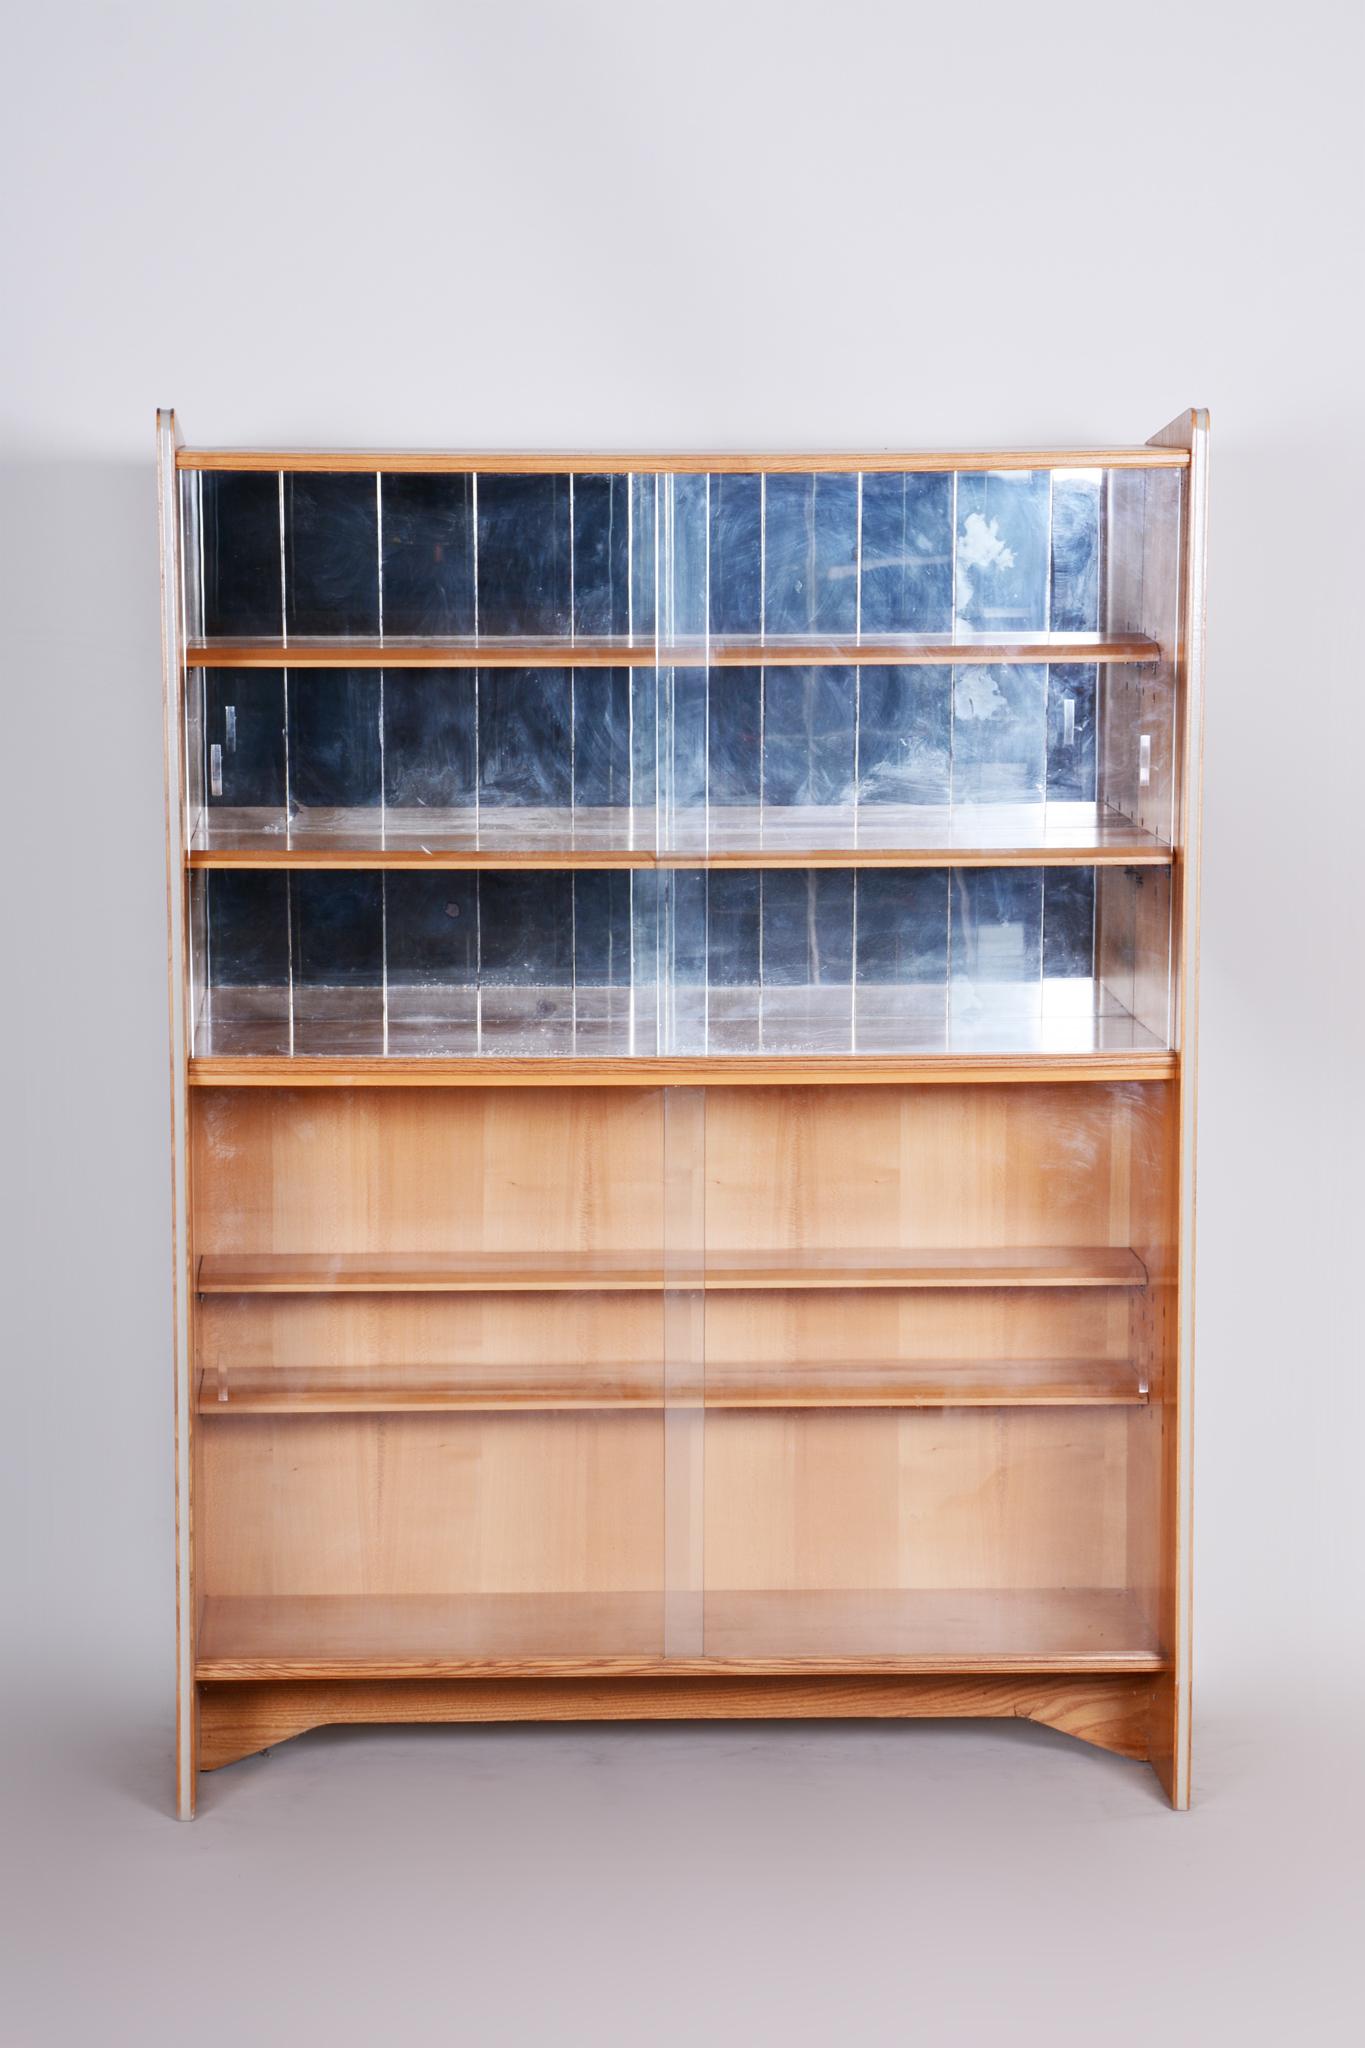 Czech mid-century bookcase
Material: Ash
Original very well preserved condition.